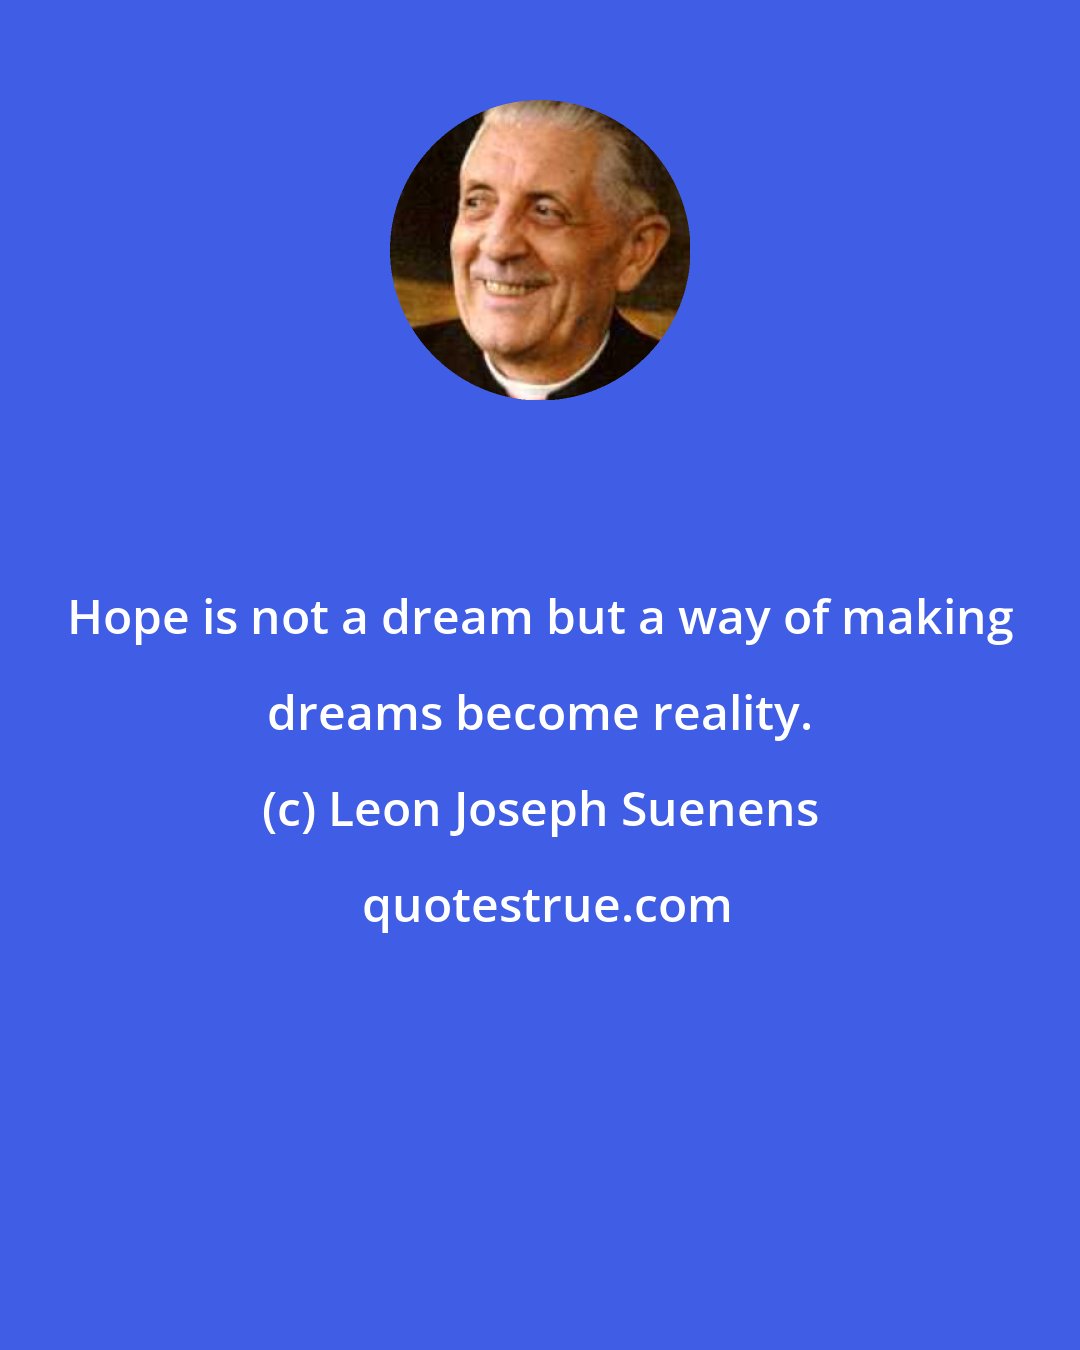 Leon Joseph Suenens: Hope is not a dream but a way of making dreams become reality.